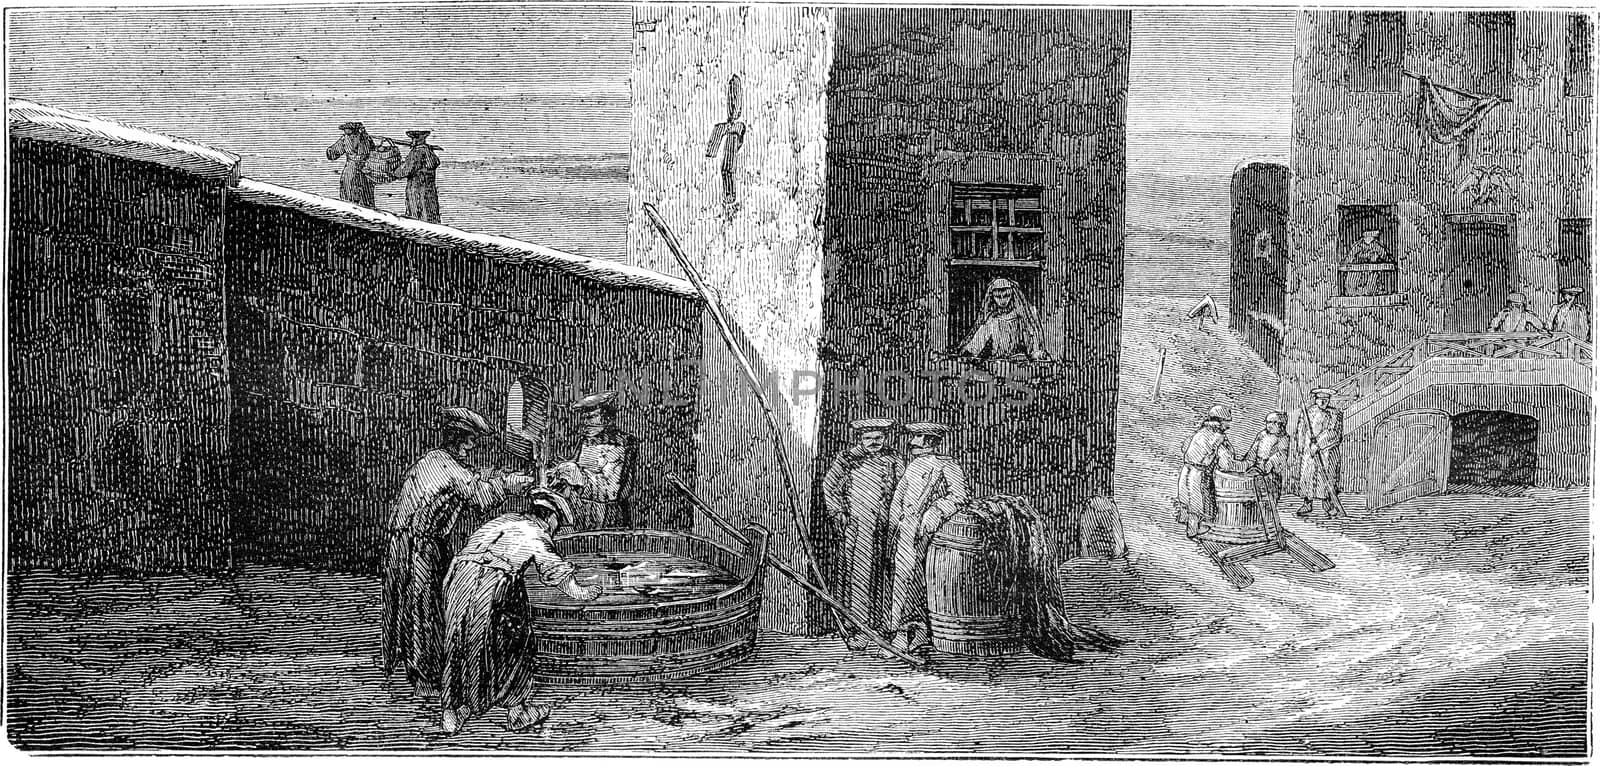 Soldiers stationed at the well (Riga), vintage engraving. by Morphart